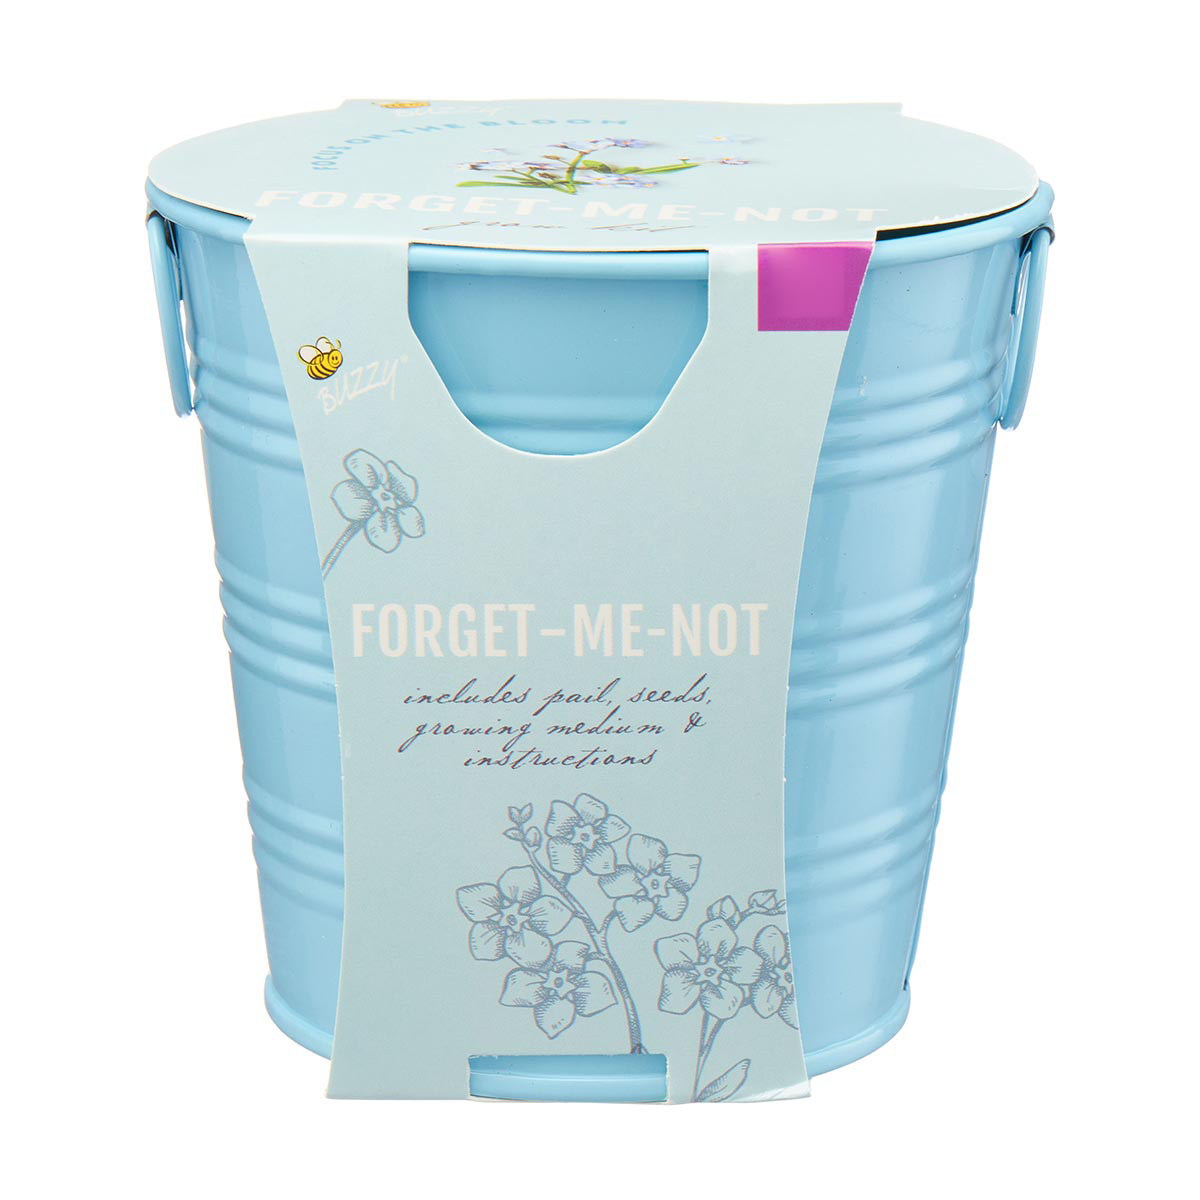 Buzzy Forget-Me-Not Growing Kit